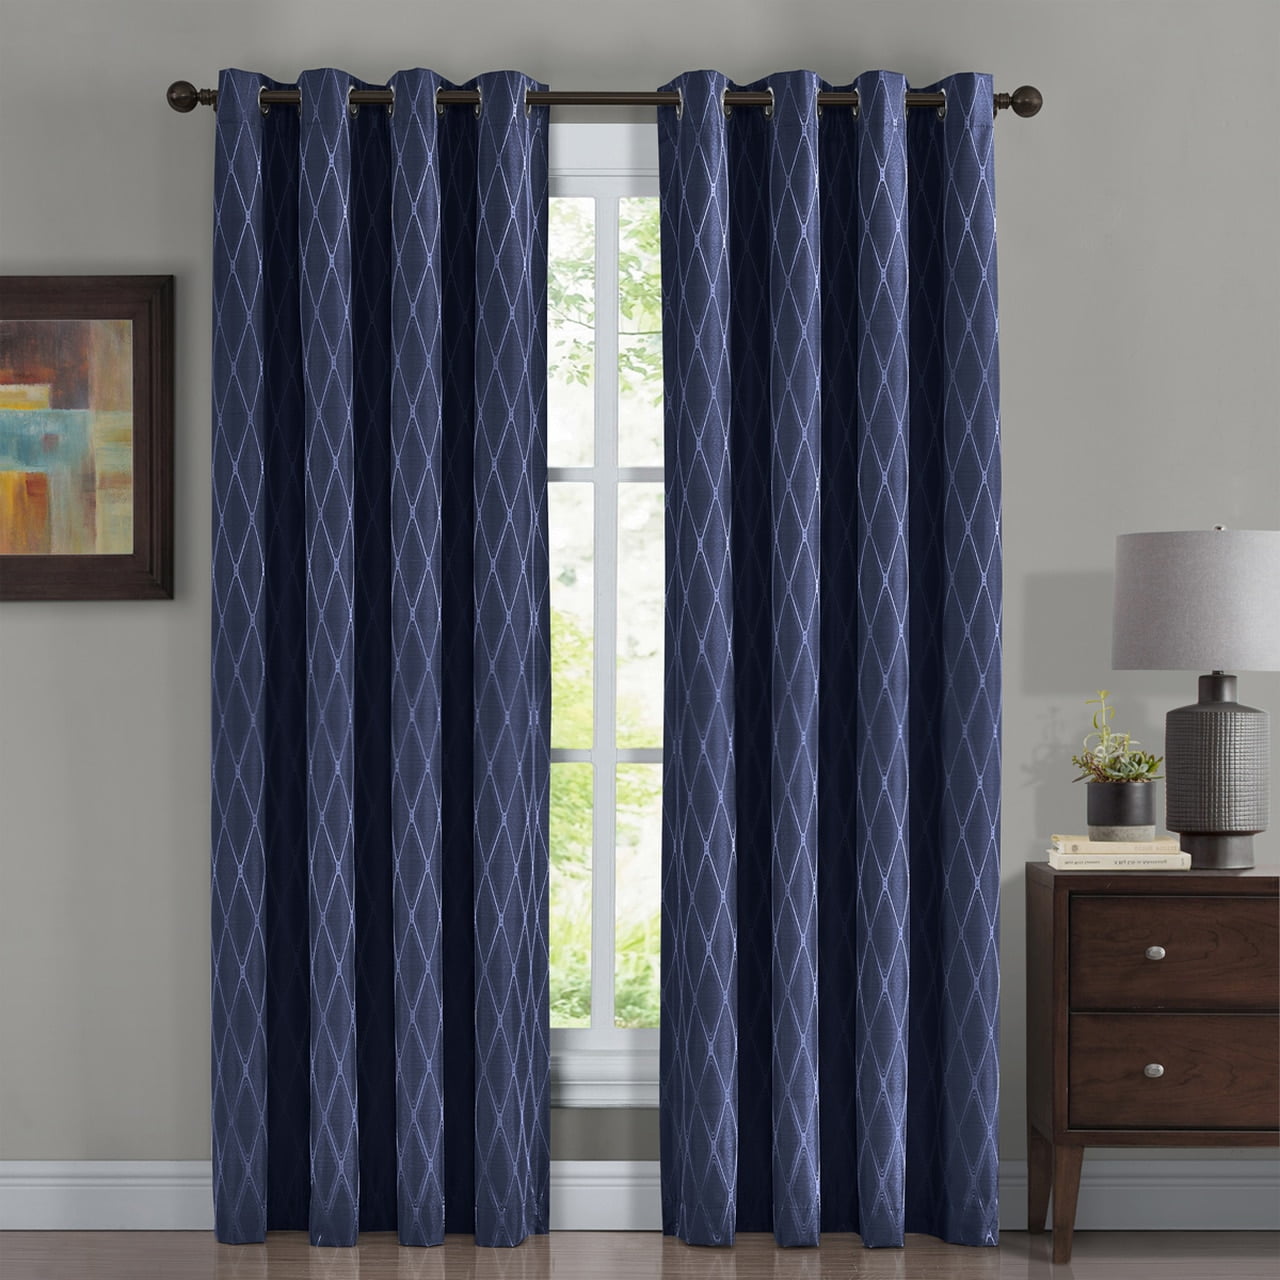 Mansoon Woven Jacquard Insulated Blackout Curtain 76 x 84" Pair Blue OR Gray 